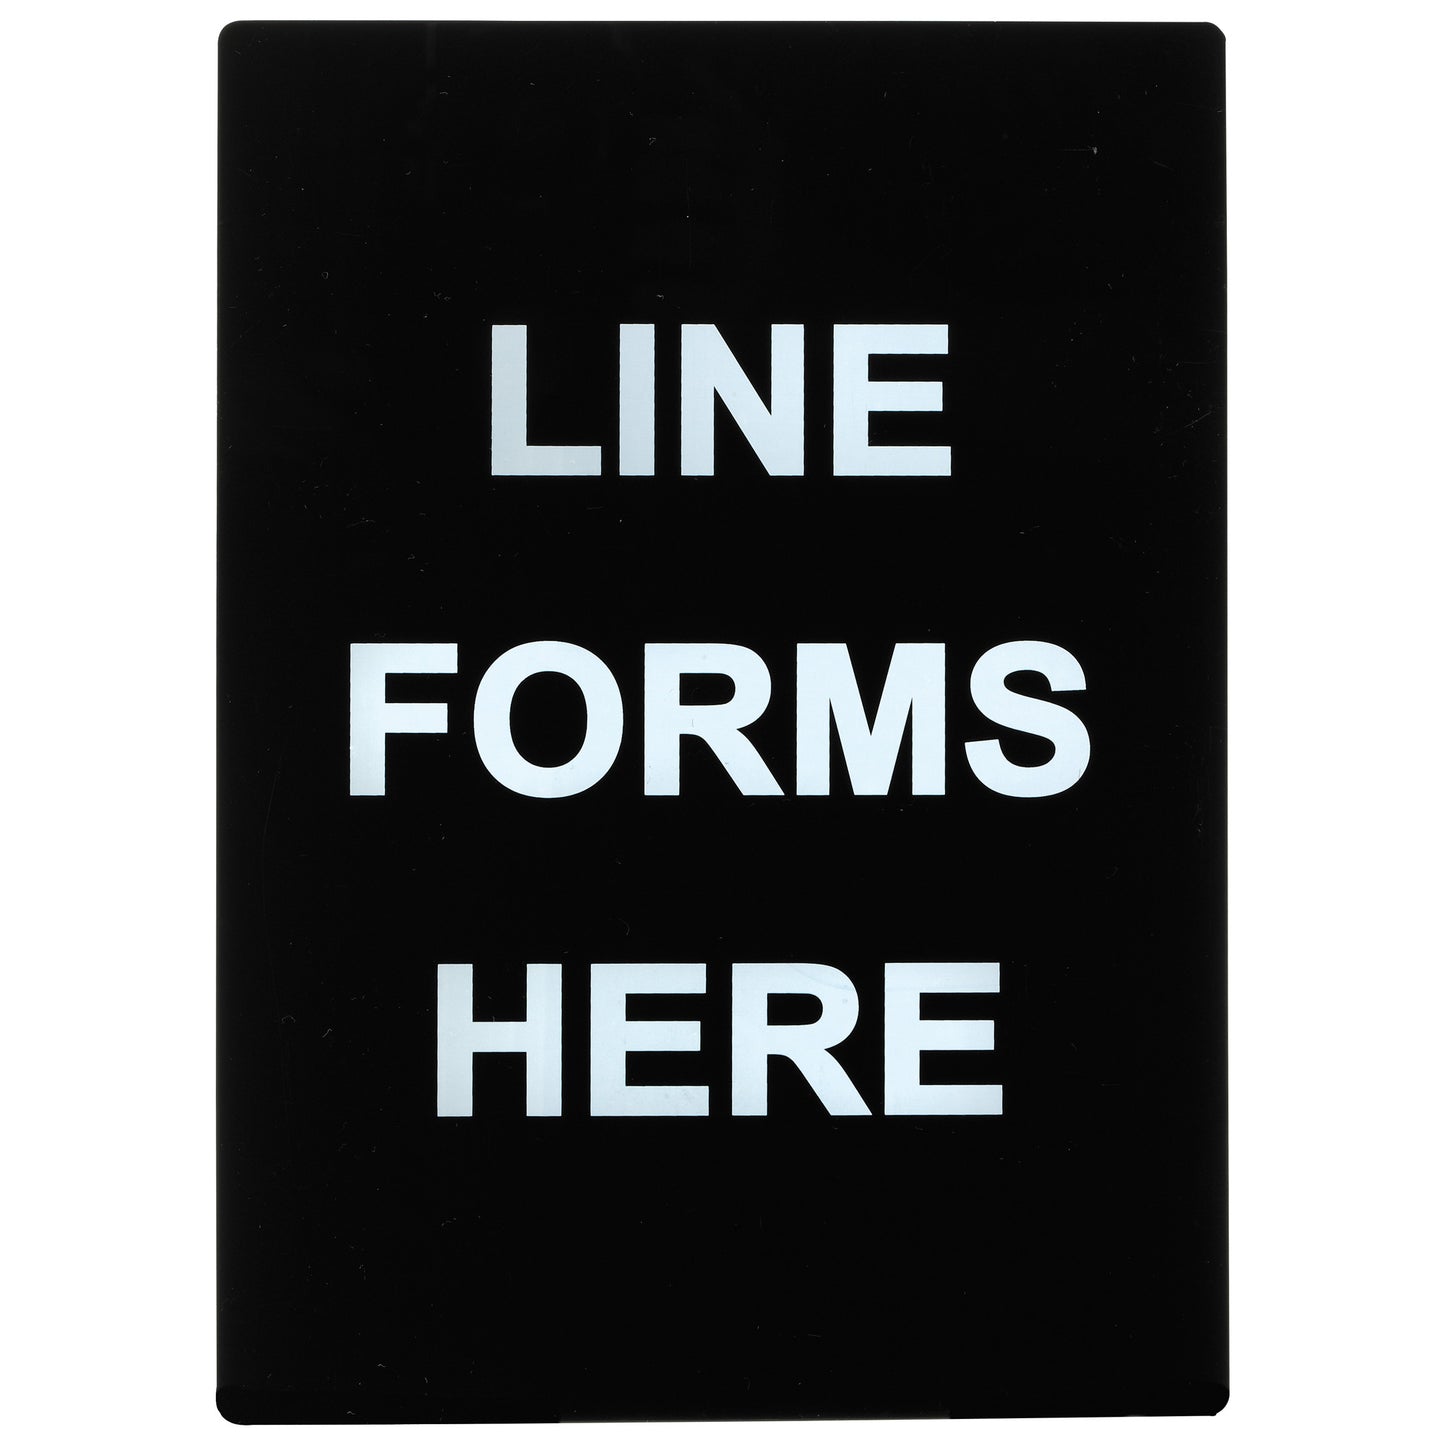 SGN-803 - Stanchion Frame Sign - SGN-803 - Line Forms Here